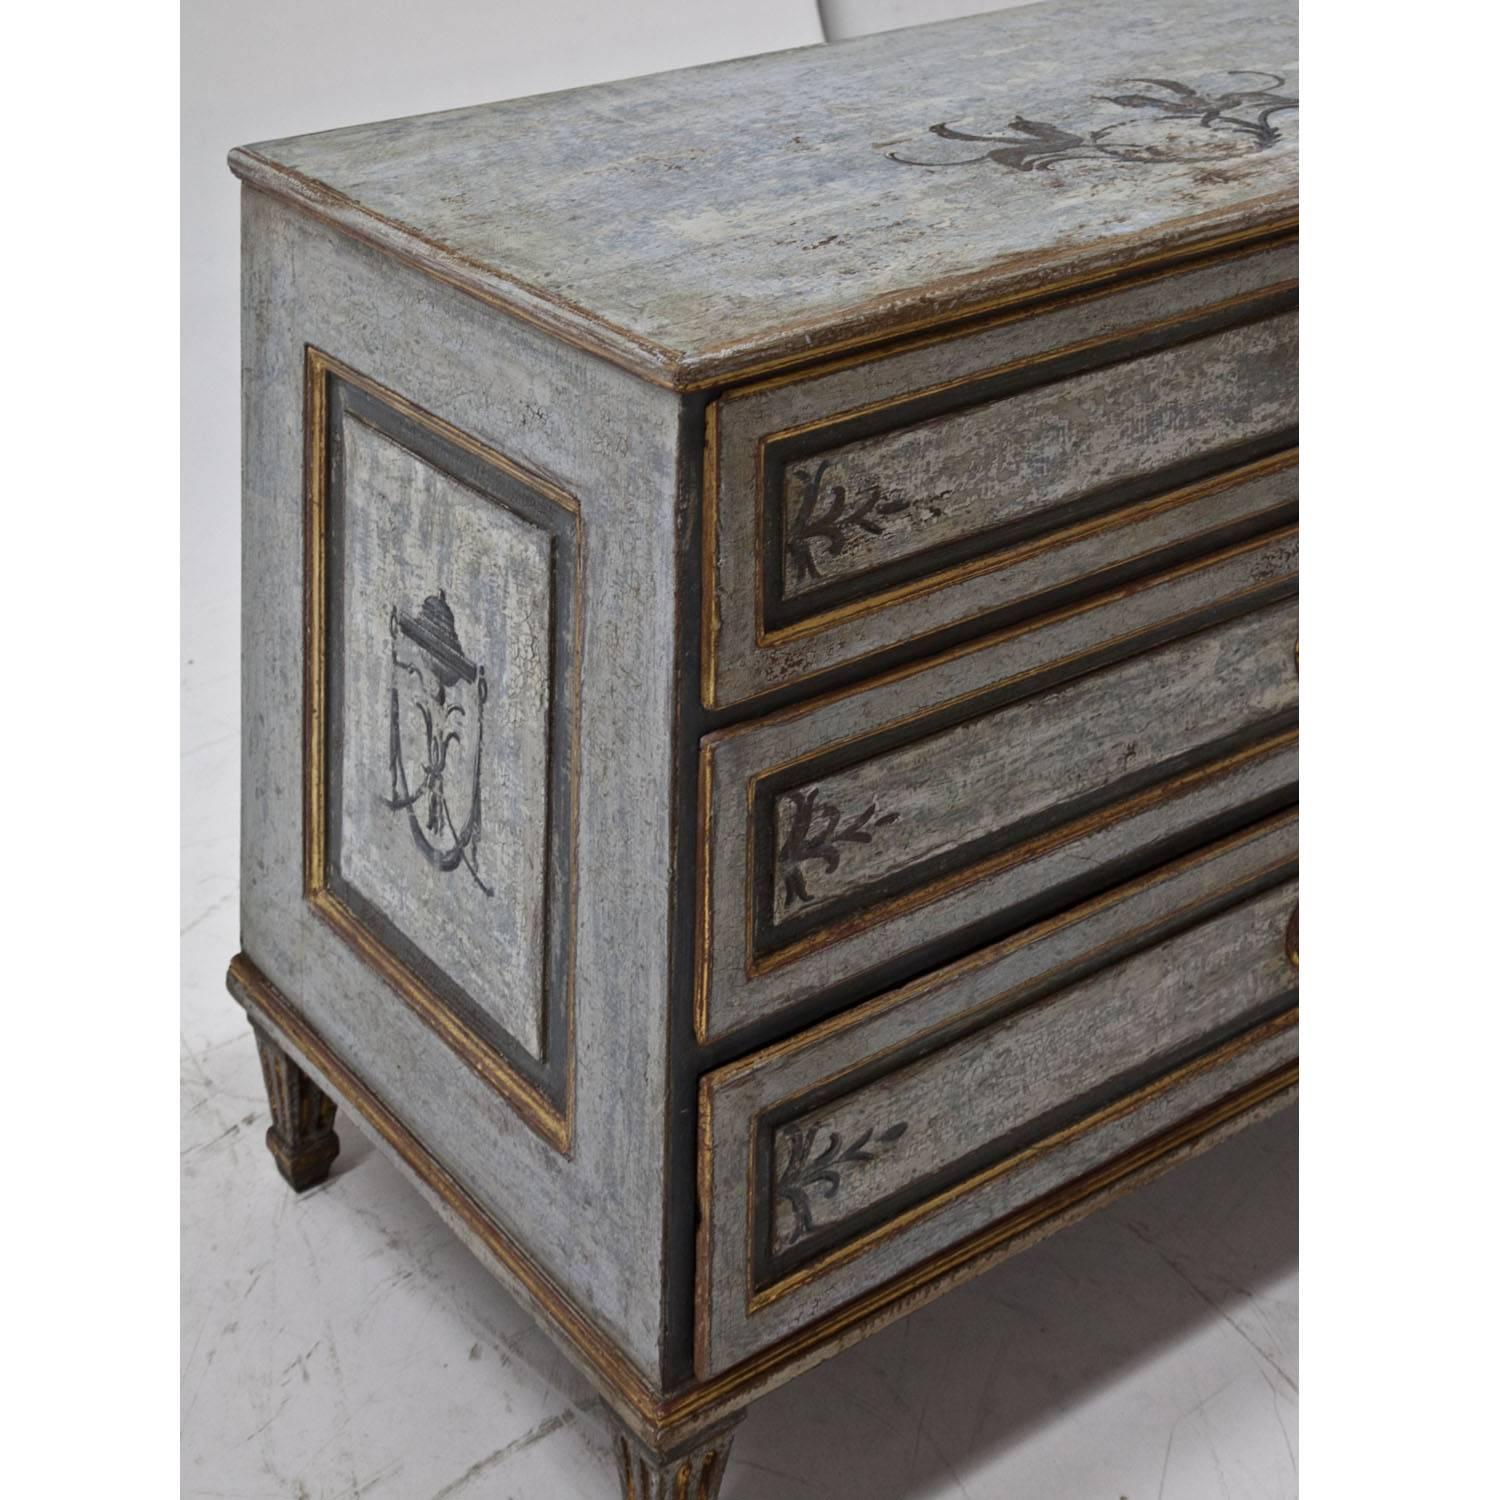 European Louis Seize Chest of Drawers, 1780